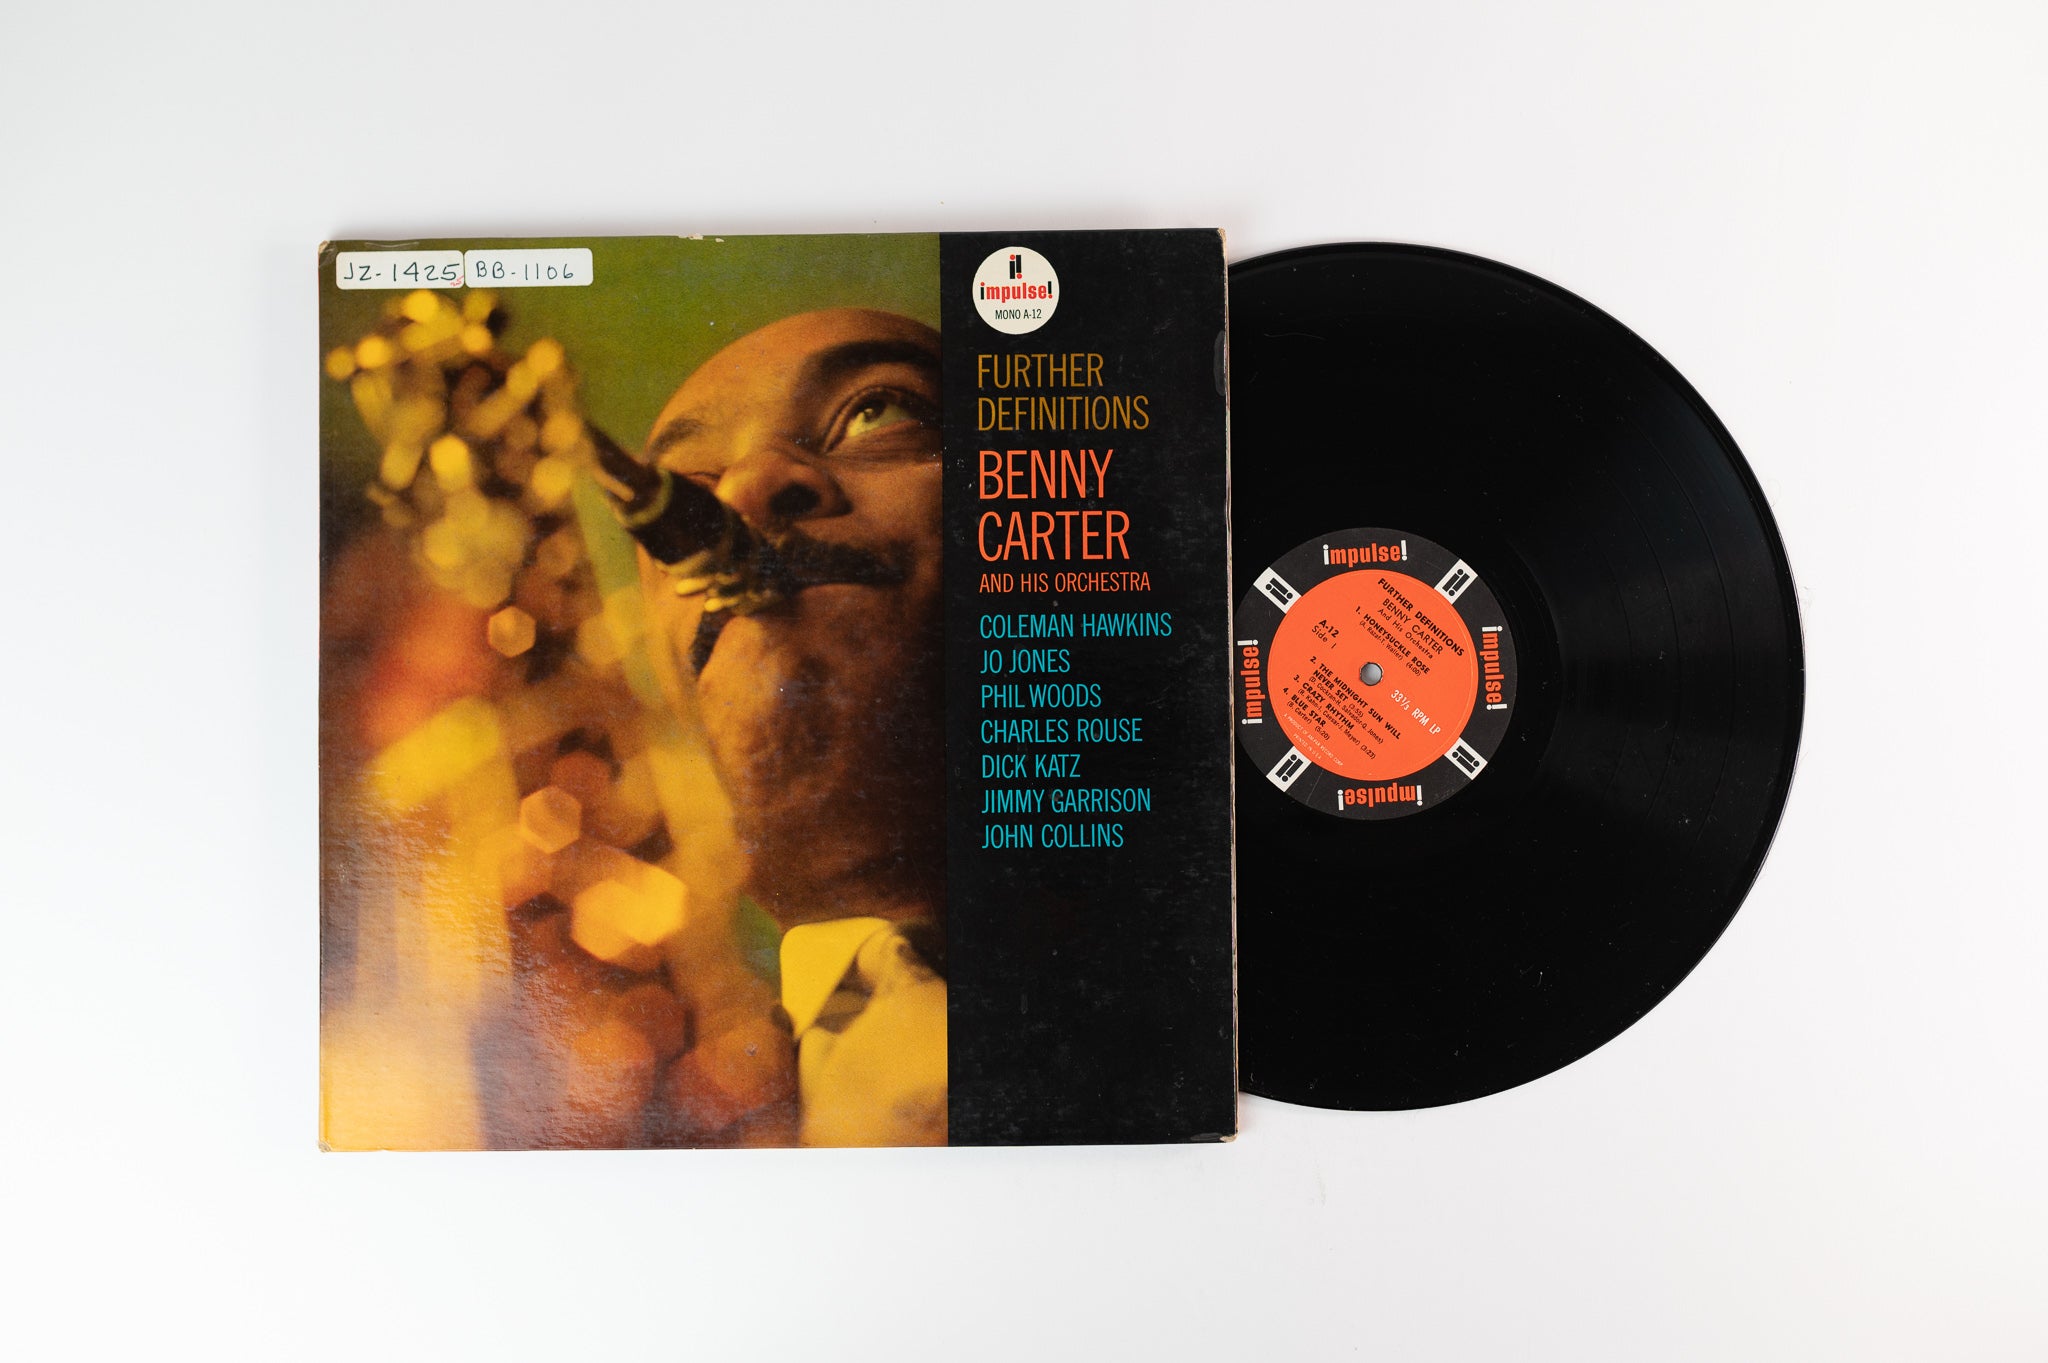 Benny Carter And His Orchestra - Further Definitions on Impulse Mono